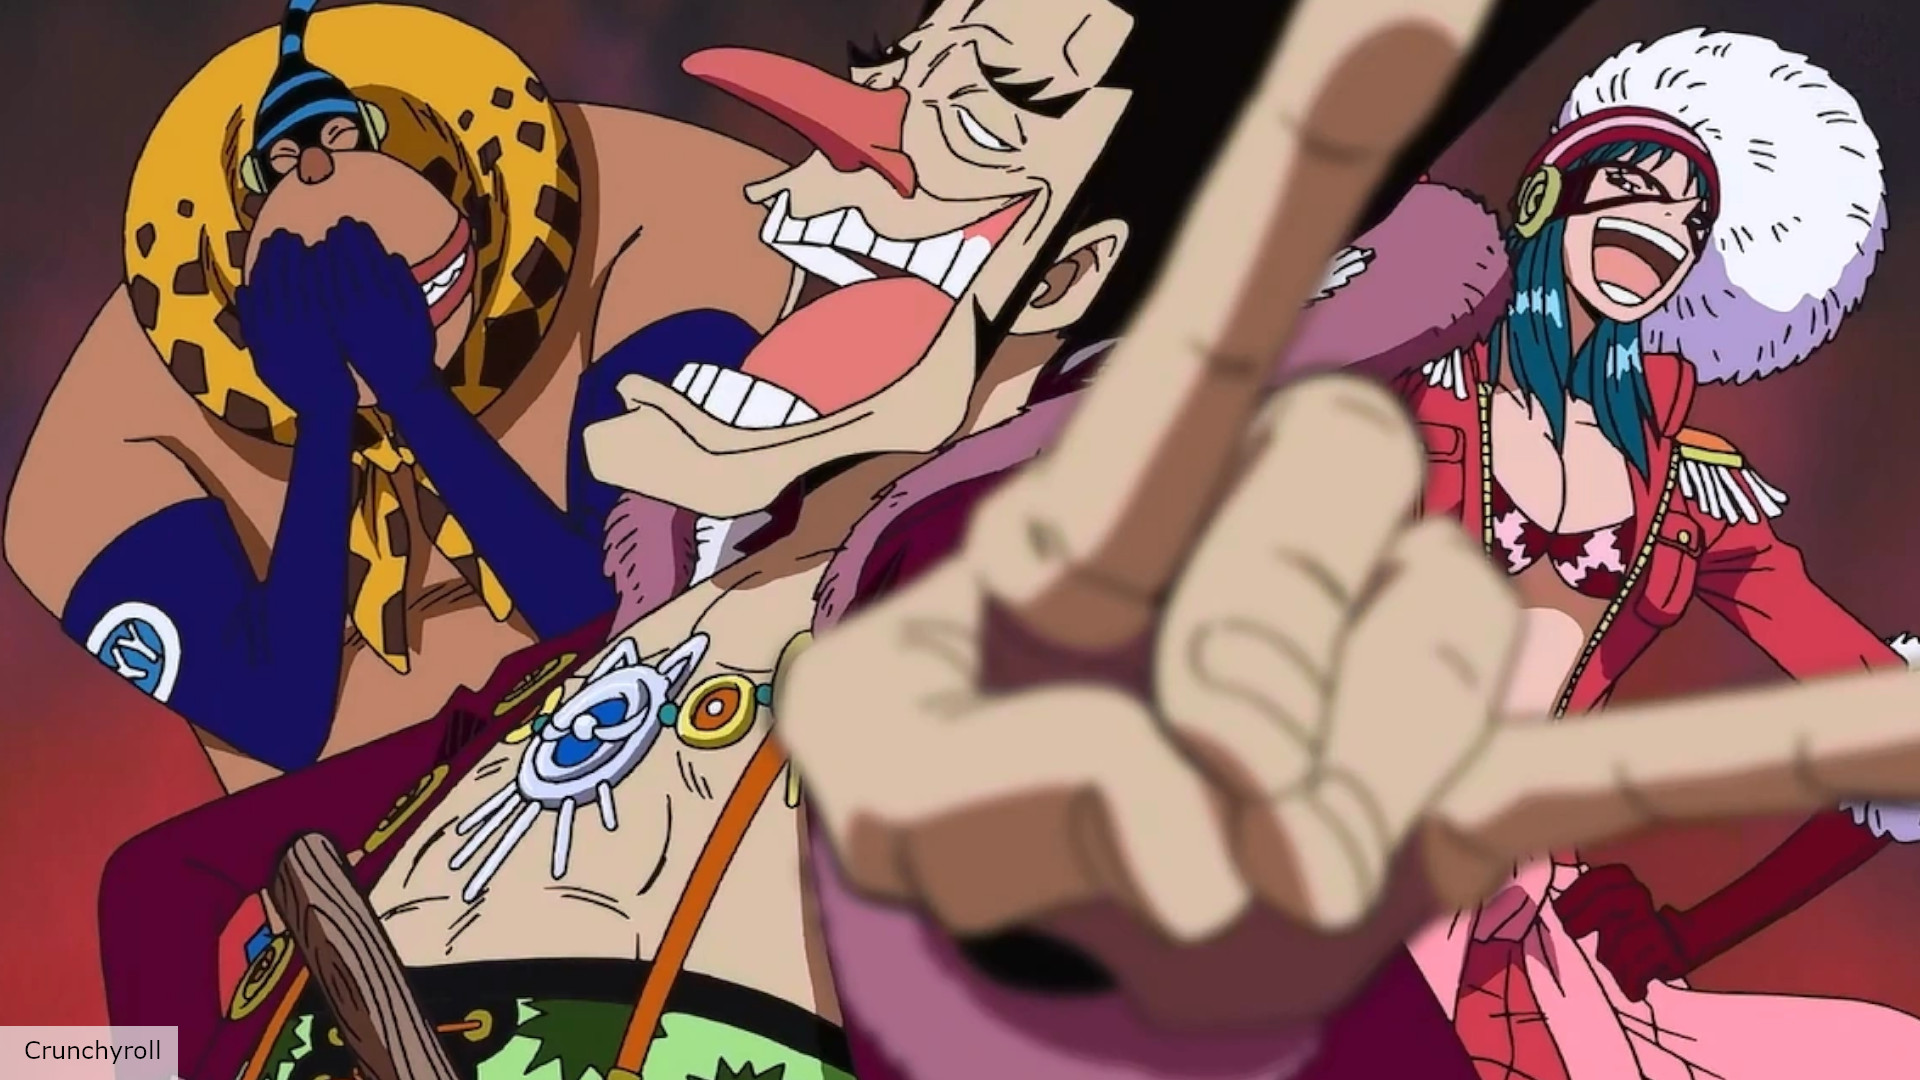 Category:Filler Episodes, One Piece Wiki